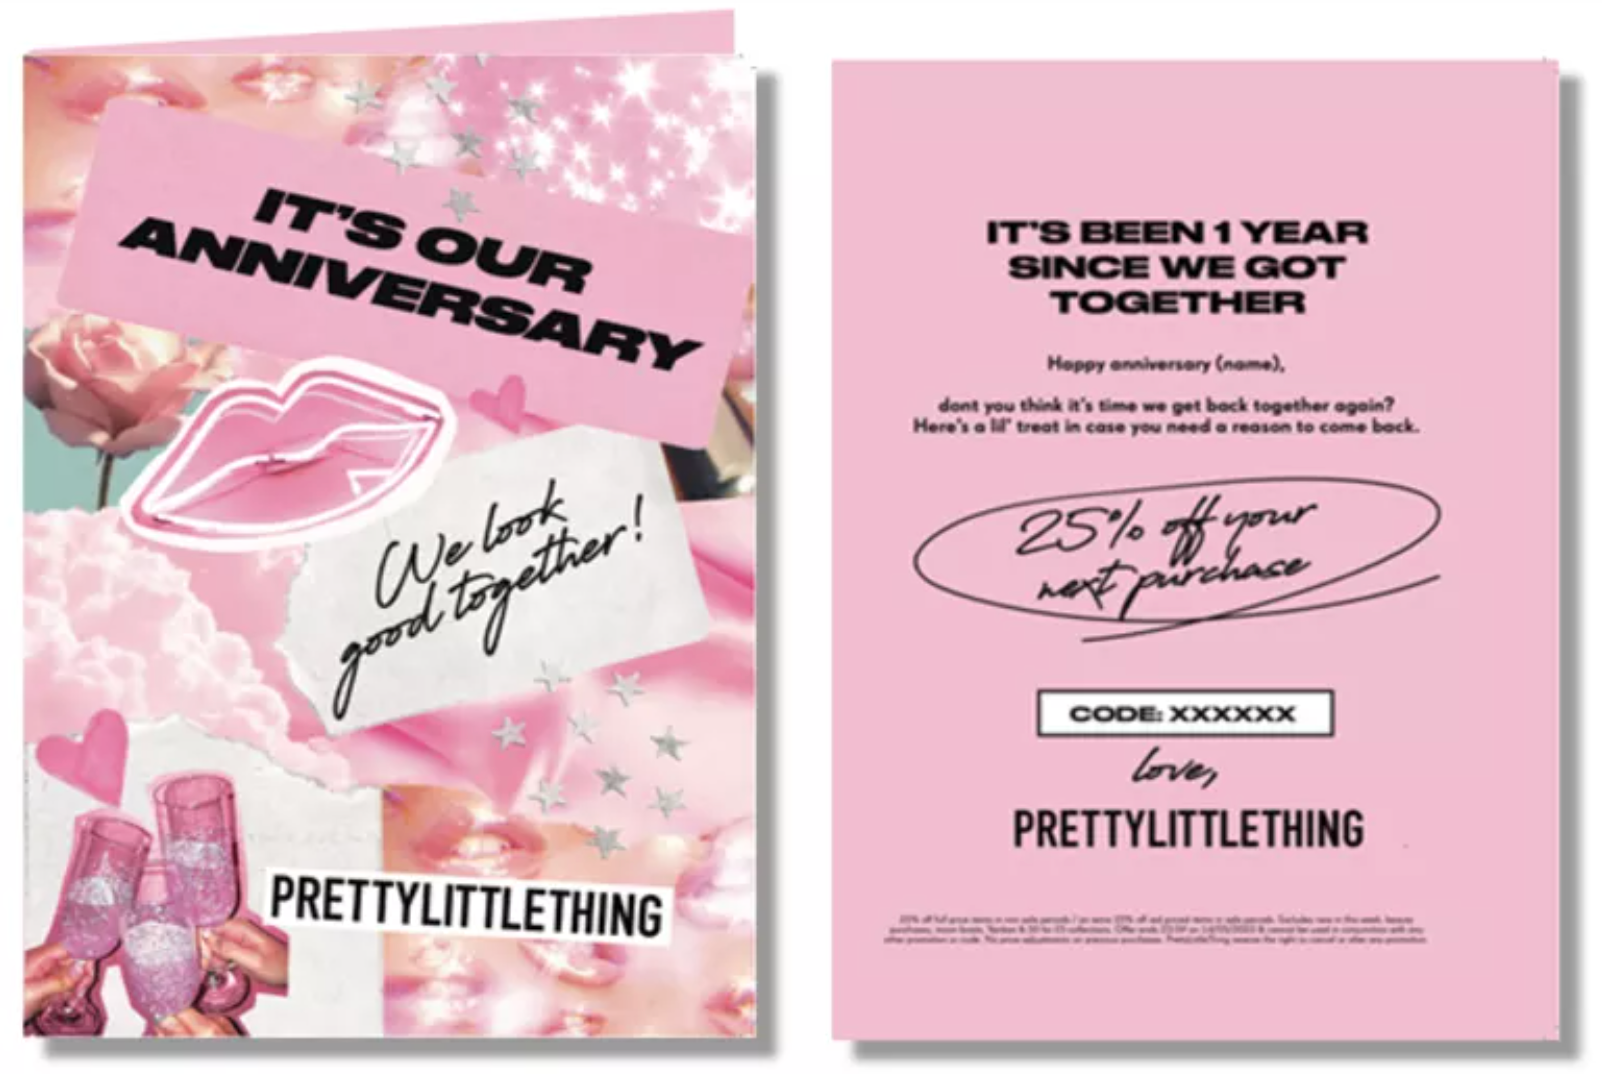 An example of PrettyLittleThing email marketing